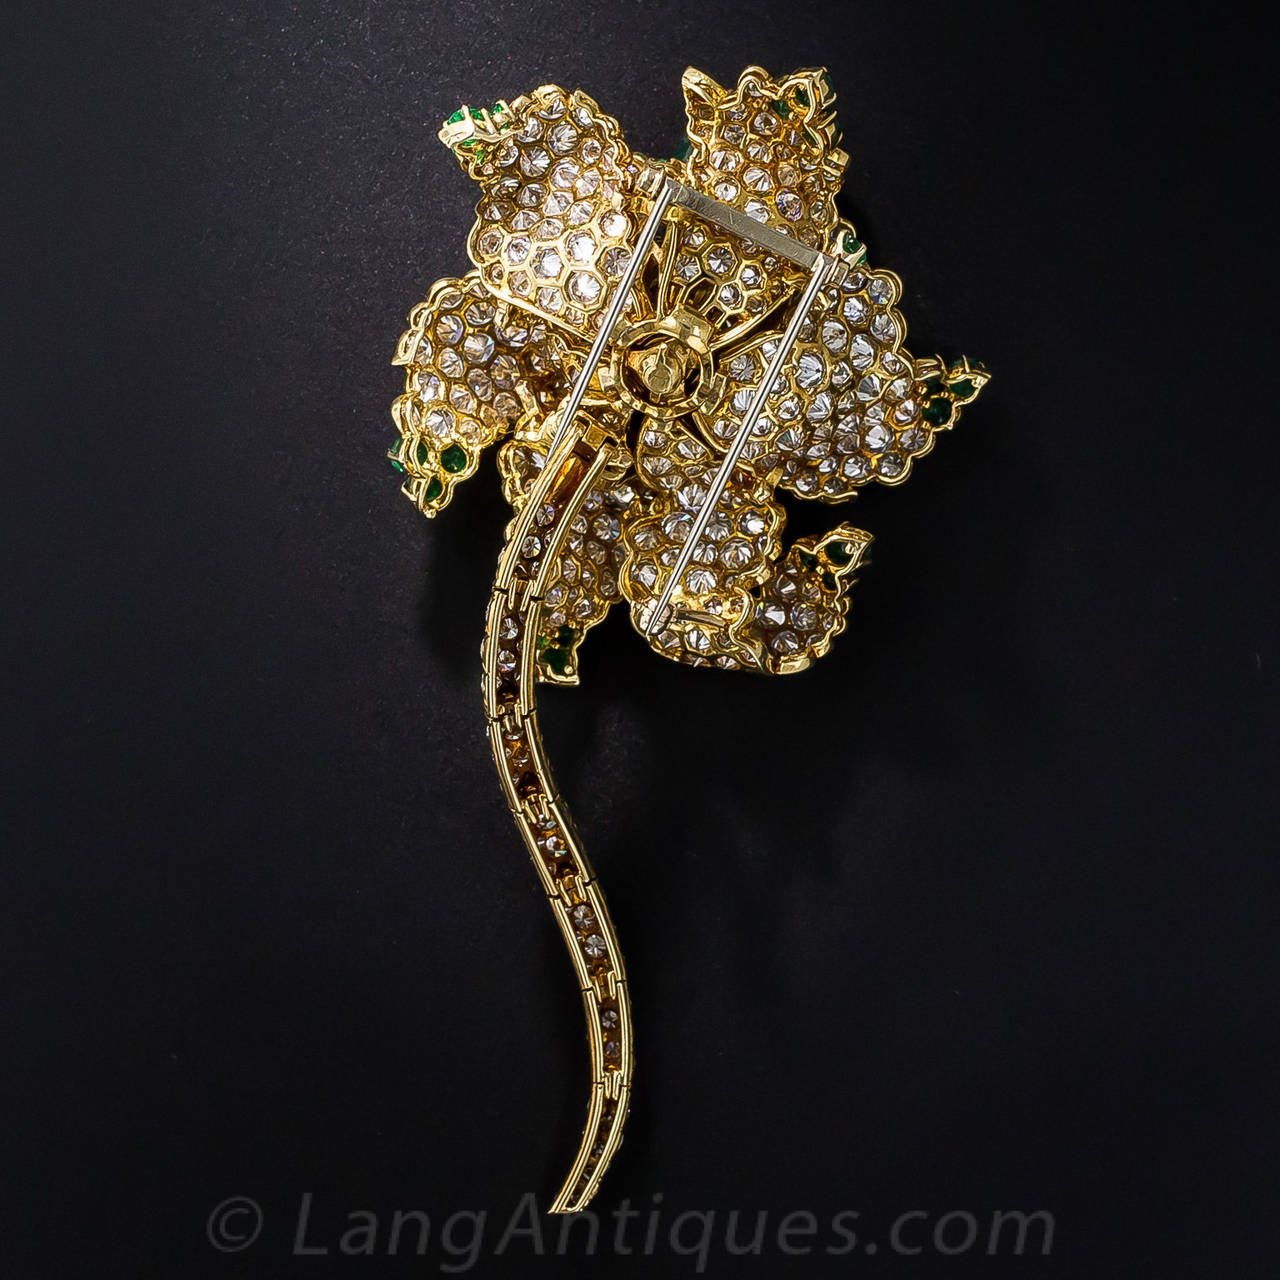 Women's or Men's Spectacular 12 Carat Cabochon Emerald Diamond Gold Flower Brooch For Sale